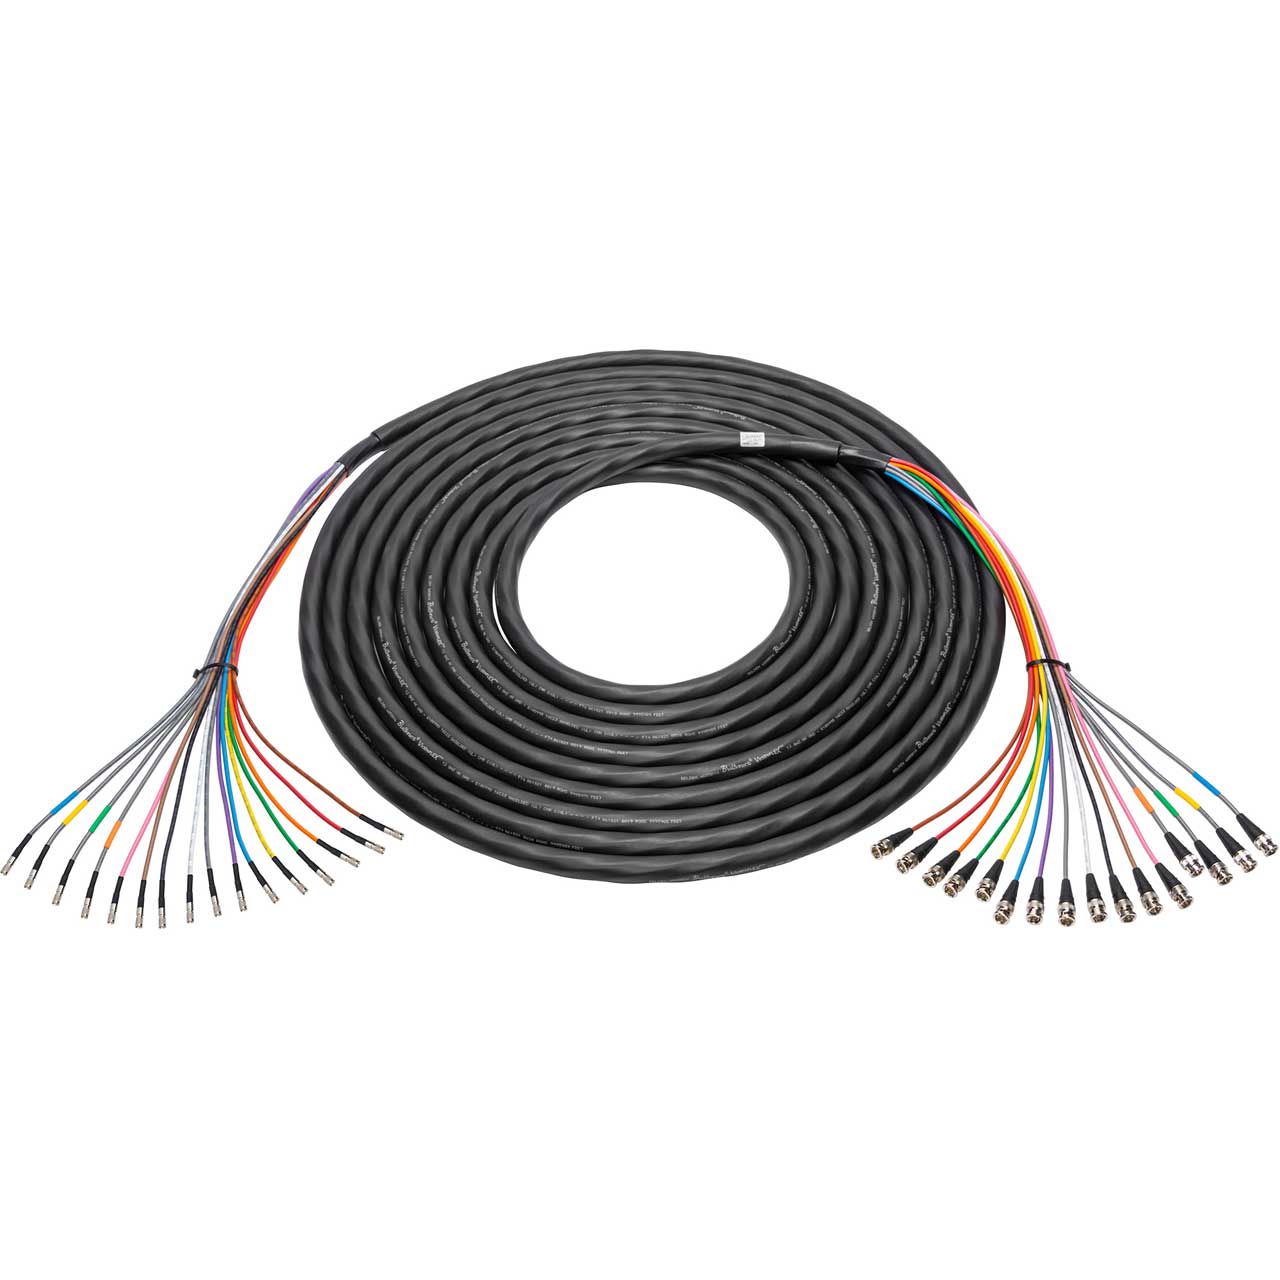 Laird 4855R16-D-B-125 16-Channel 12G-SDI / 4K UHD DIN 1.0 / 2.3 Male to BNC Male Snake Cable - 125 Foot 4855R16-D-B-125